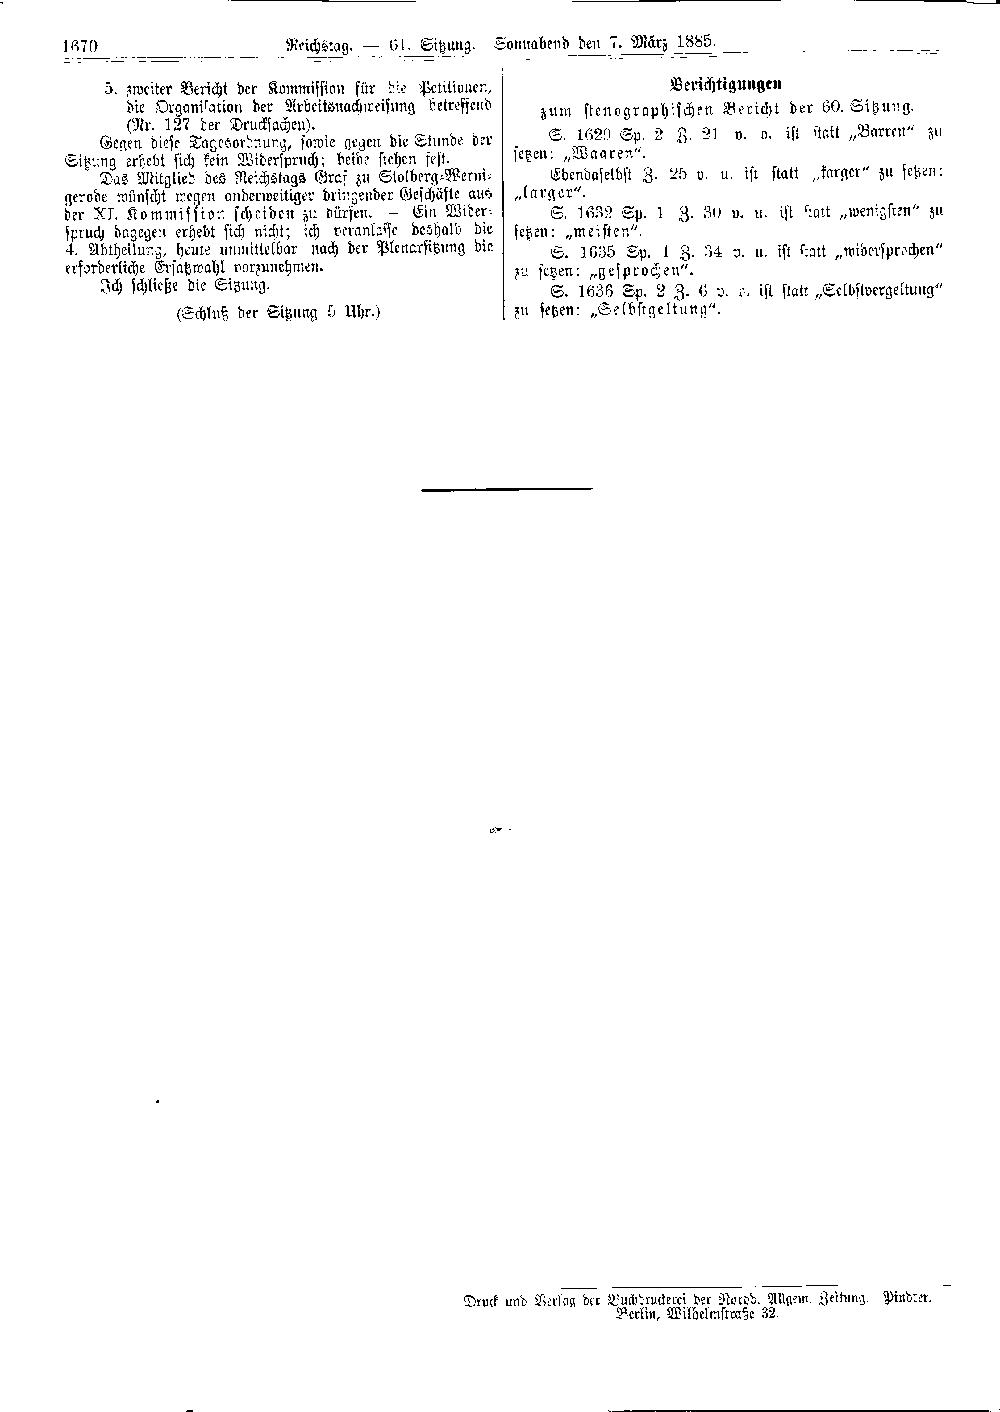 Scan of page 1670